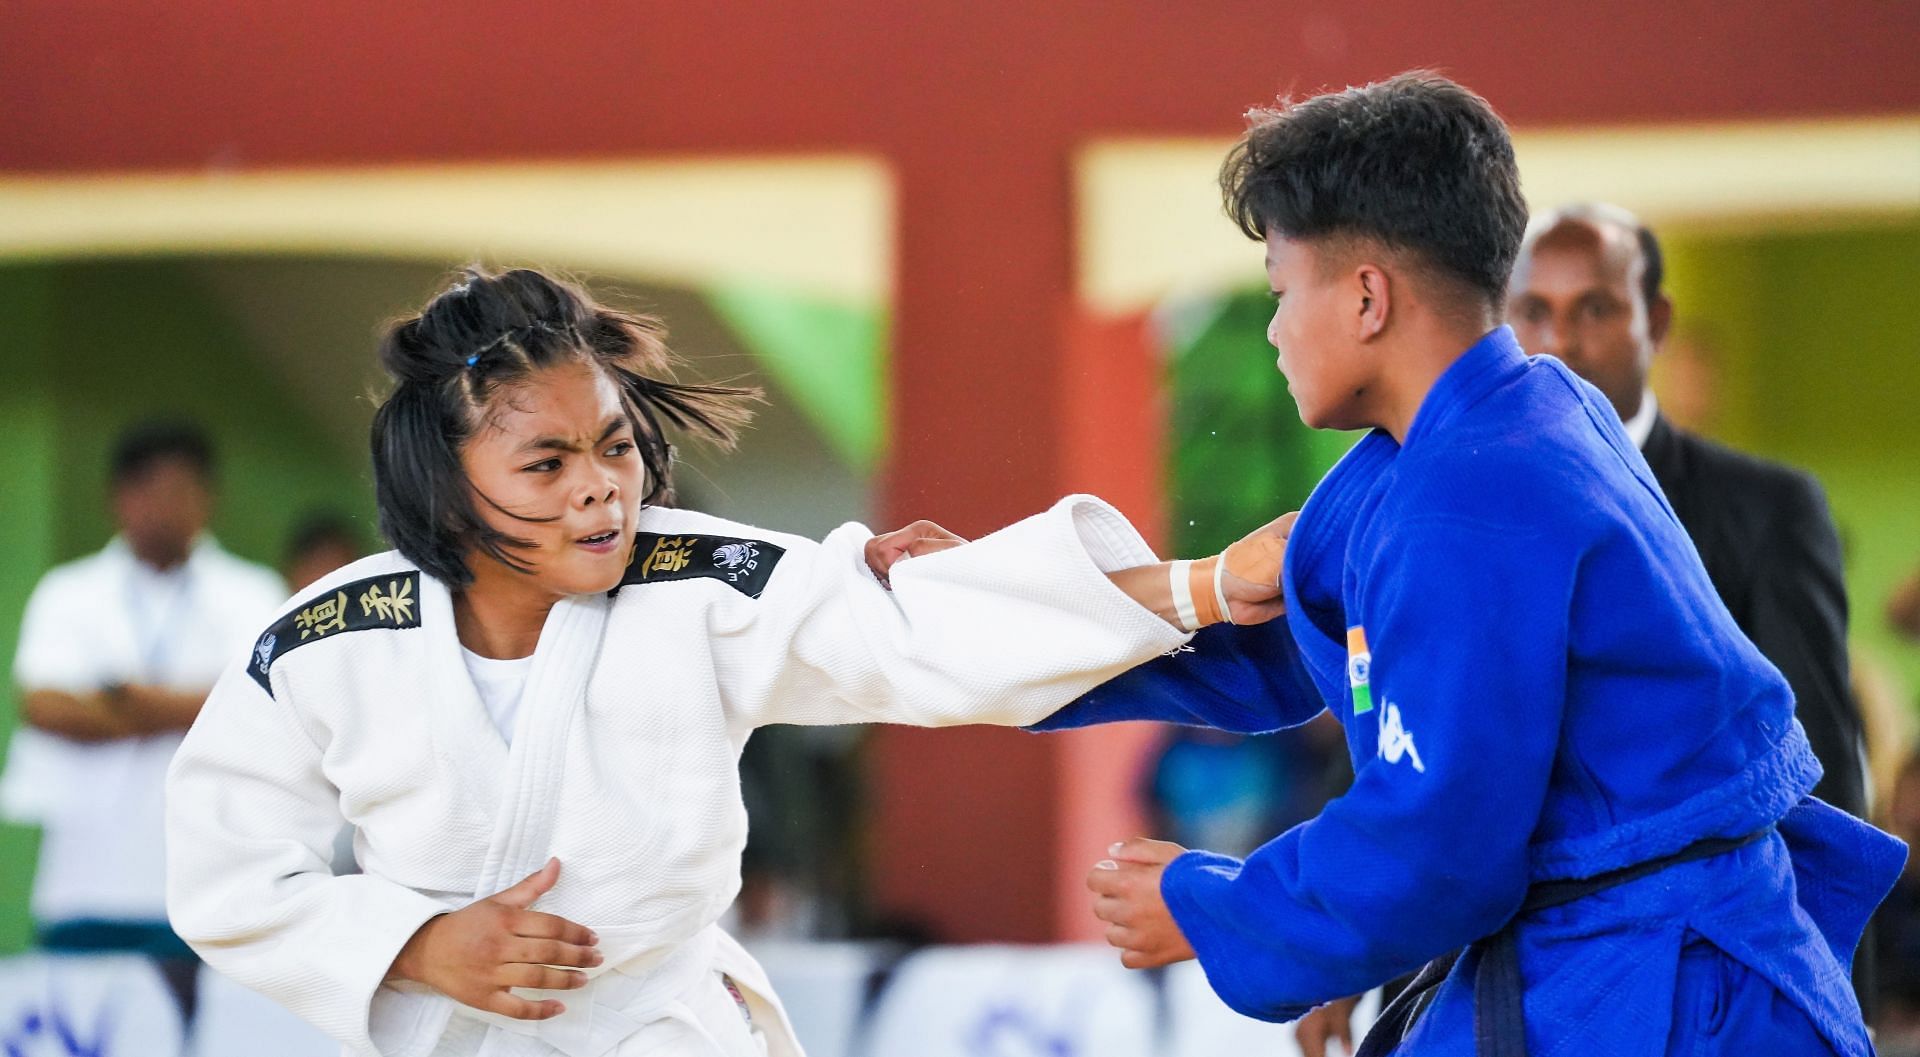 Players in action during the Northeast Judo Championship in Imphal. Photo credit IIS.